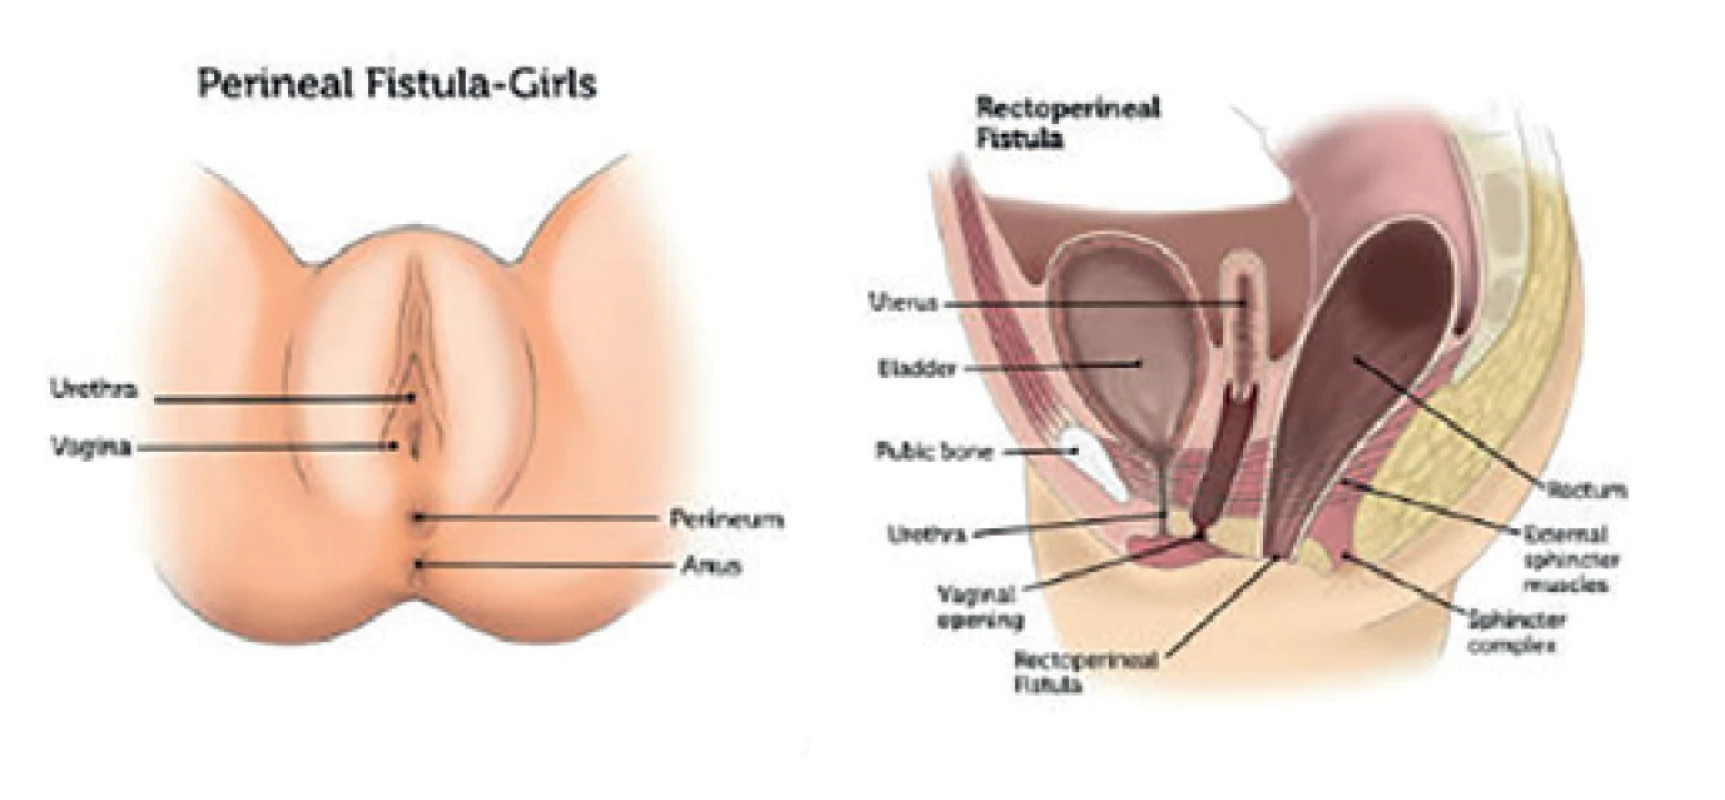 Anus perinei ventralis u dívek
(dostupné z https://www.childrenshospital.org/conditions-
-and-treatments/conditions/a/anorectal-malformation)<br>
Fig. 1: Anus perinei ventralis in girl
(available at https://www.childrenshospital.org/conditions-
-and-treatments/conditions/a/anorectal-malformation)